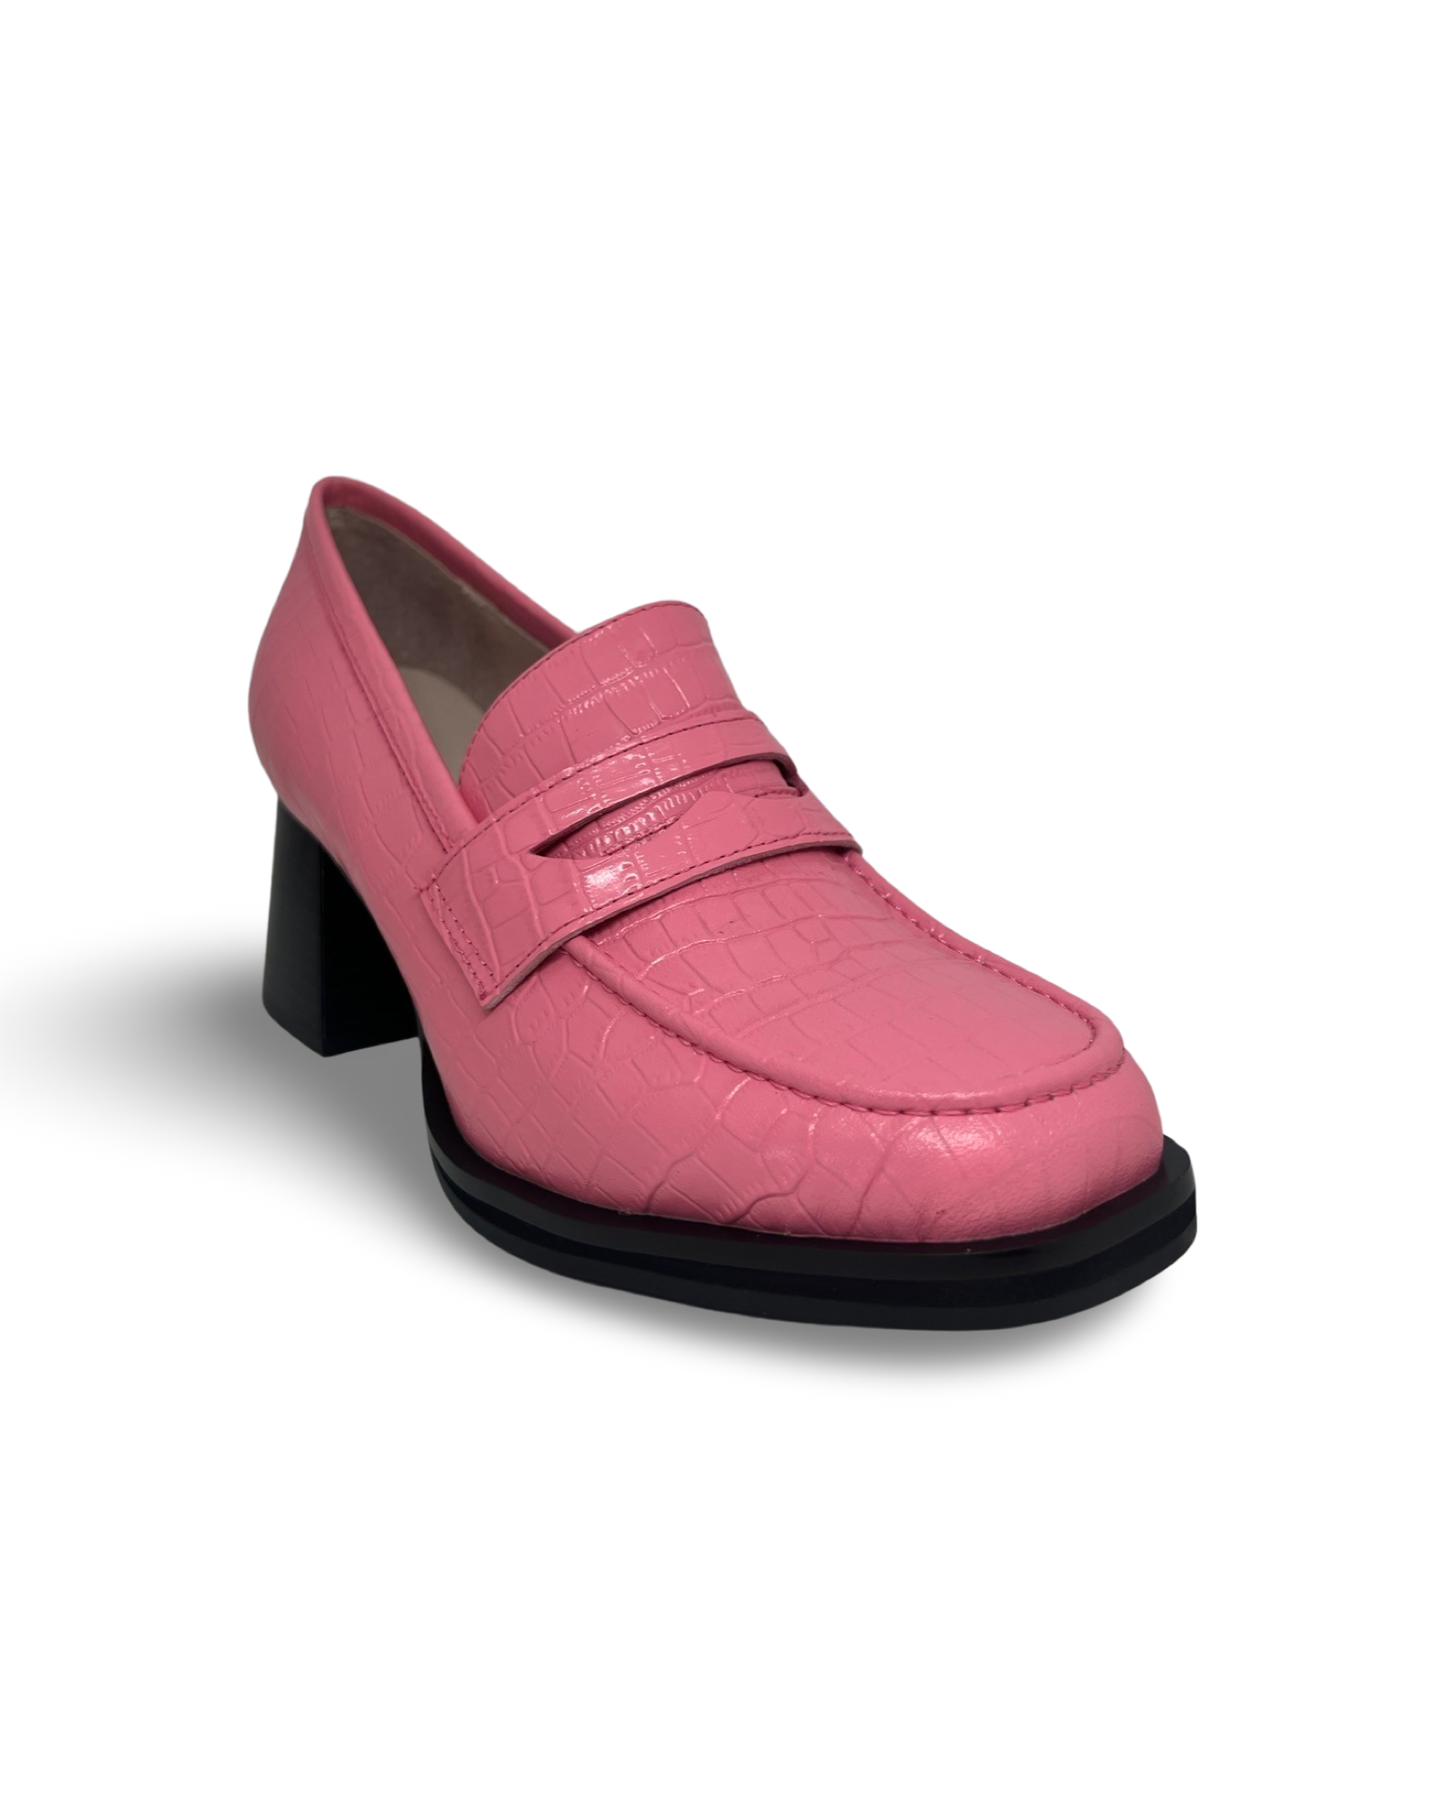 Holly By Andrea Biani - Pink Croc